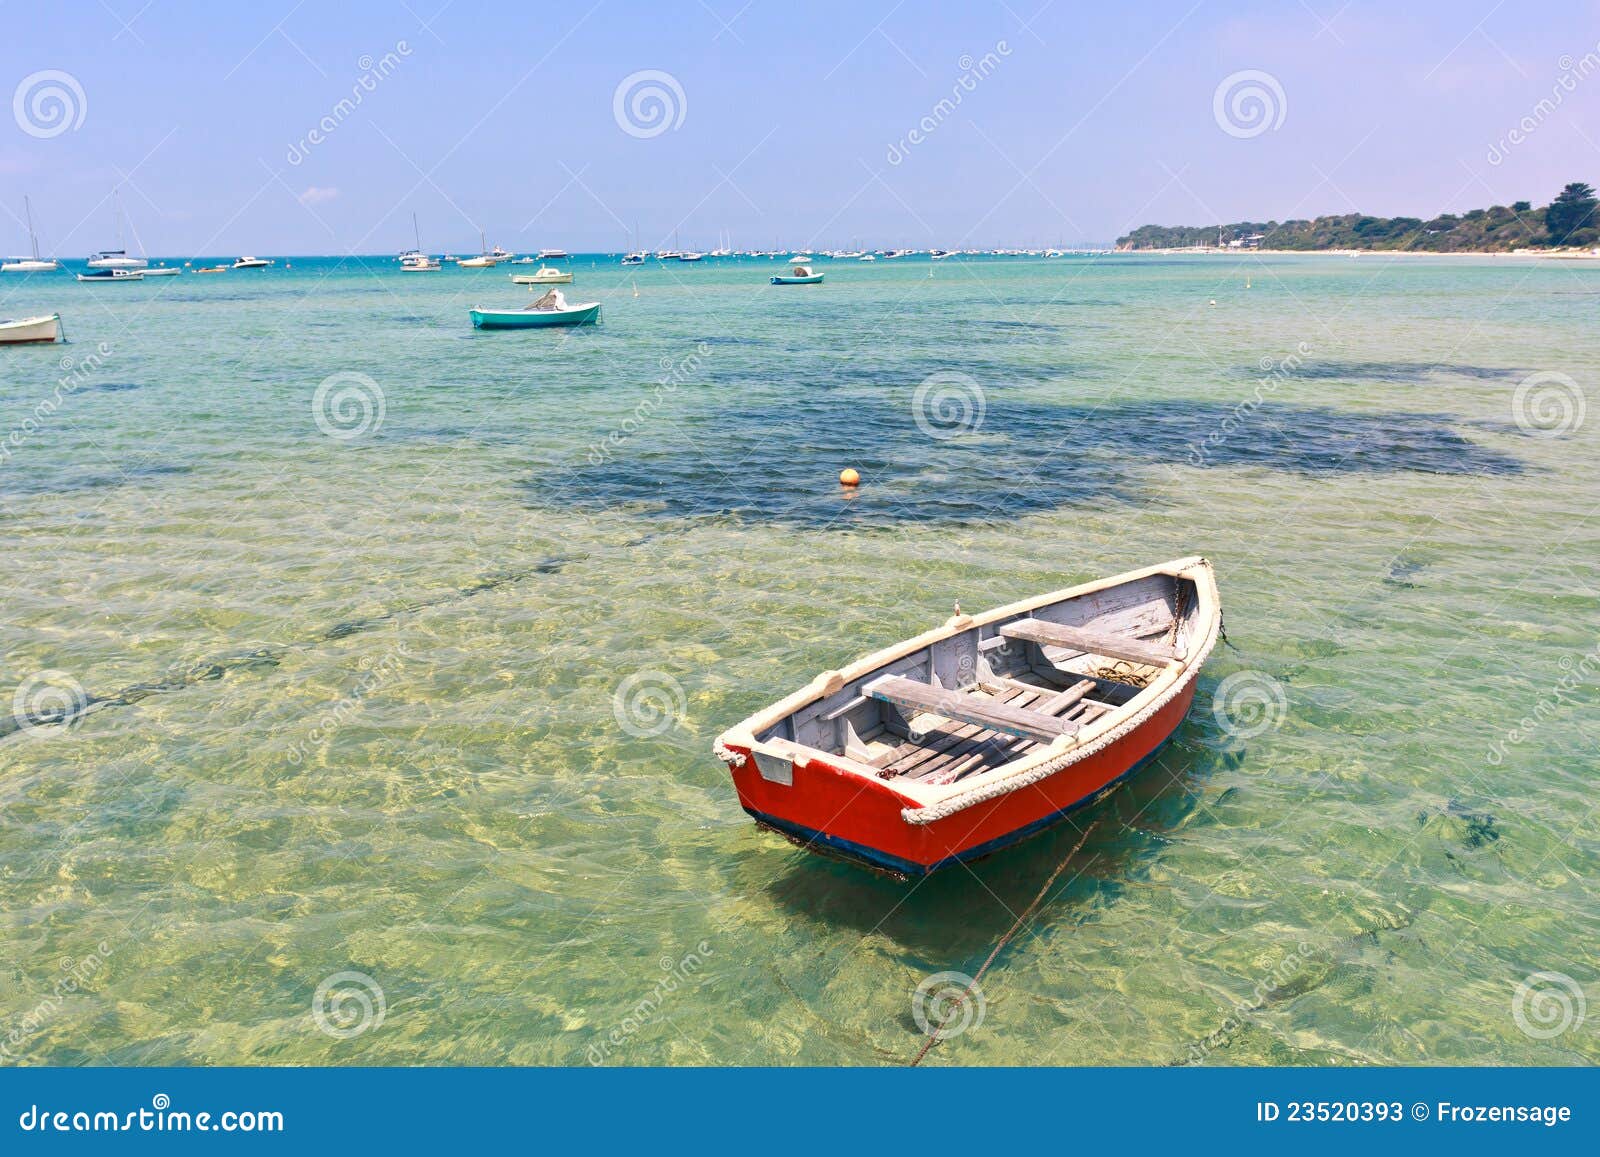 Red wooden boat docked in shallow water on a calm summer's day.